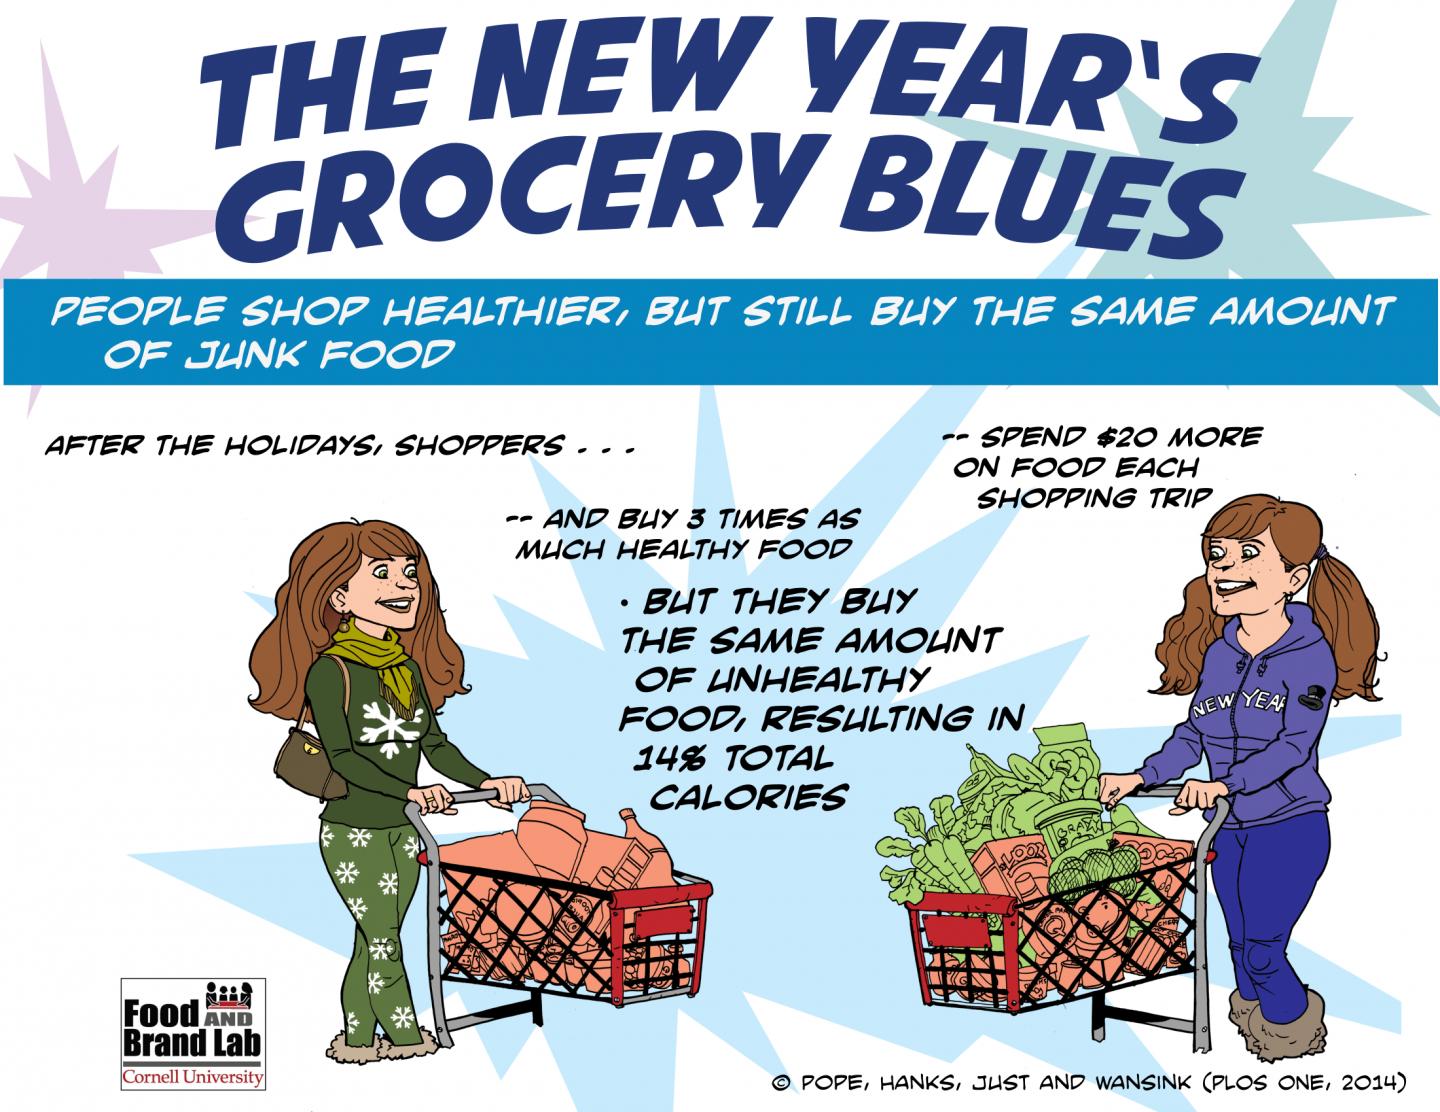 The New Year's Grocery Blues [IMAGE] EurekAlert! Science News Releases